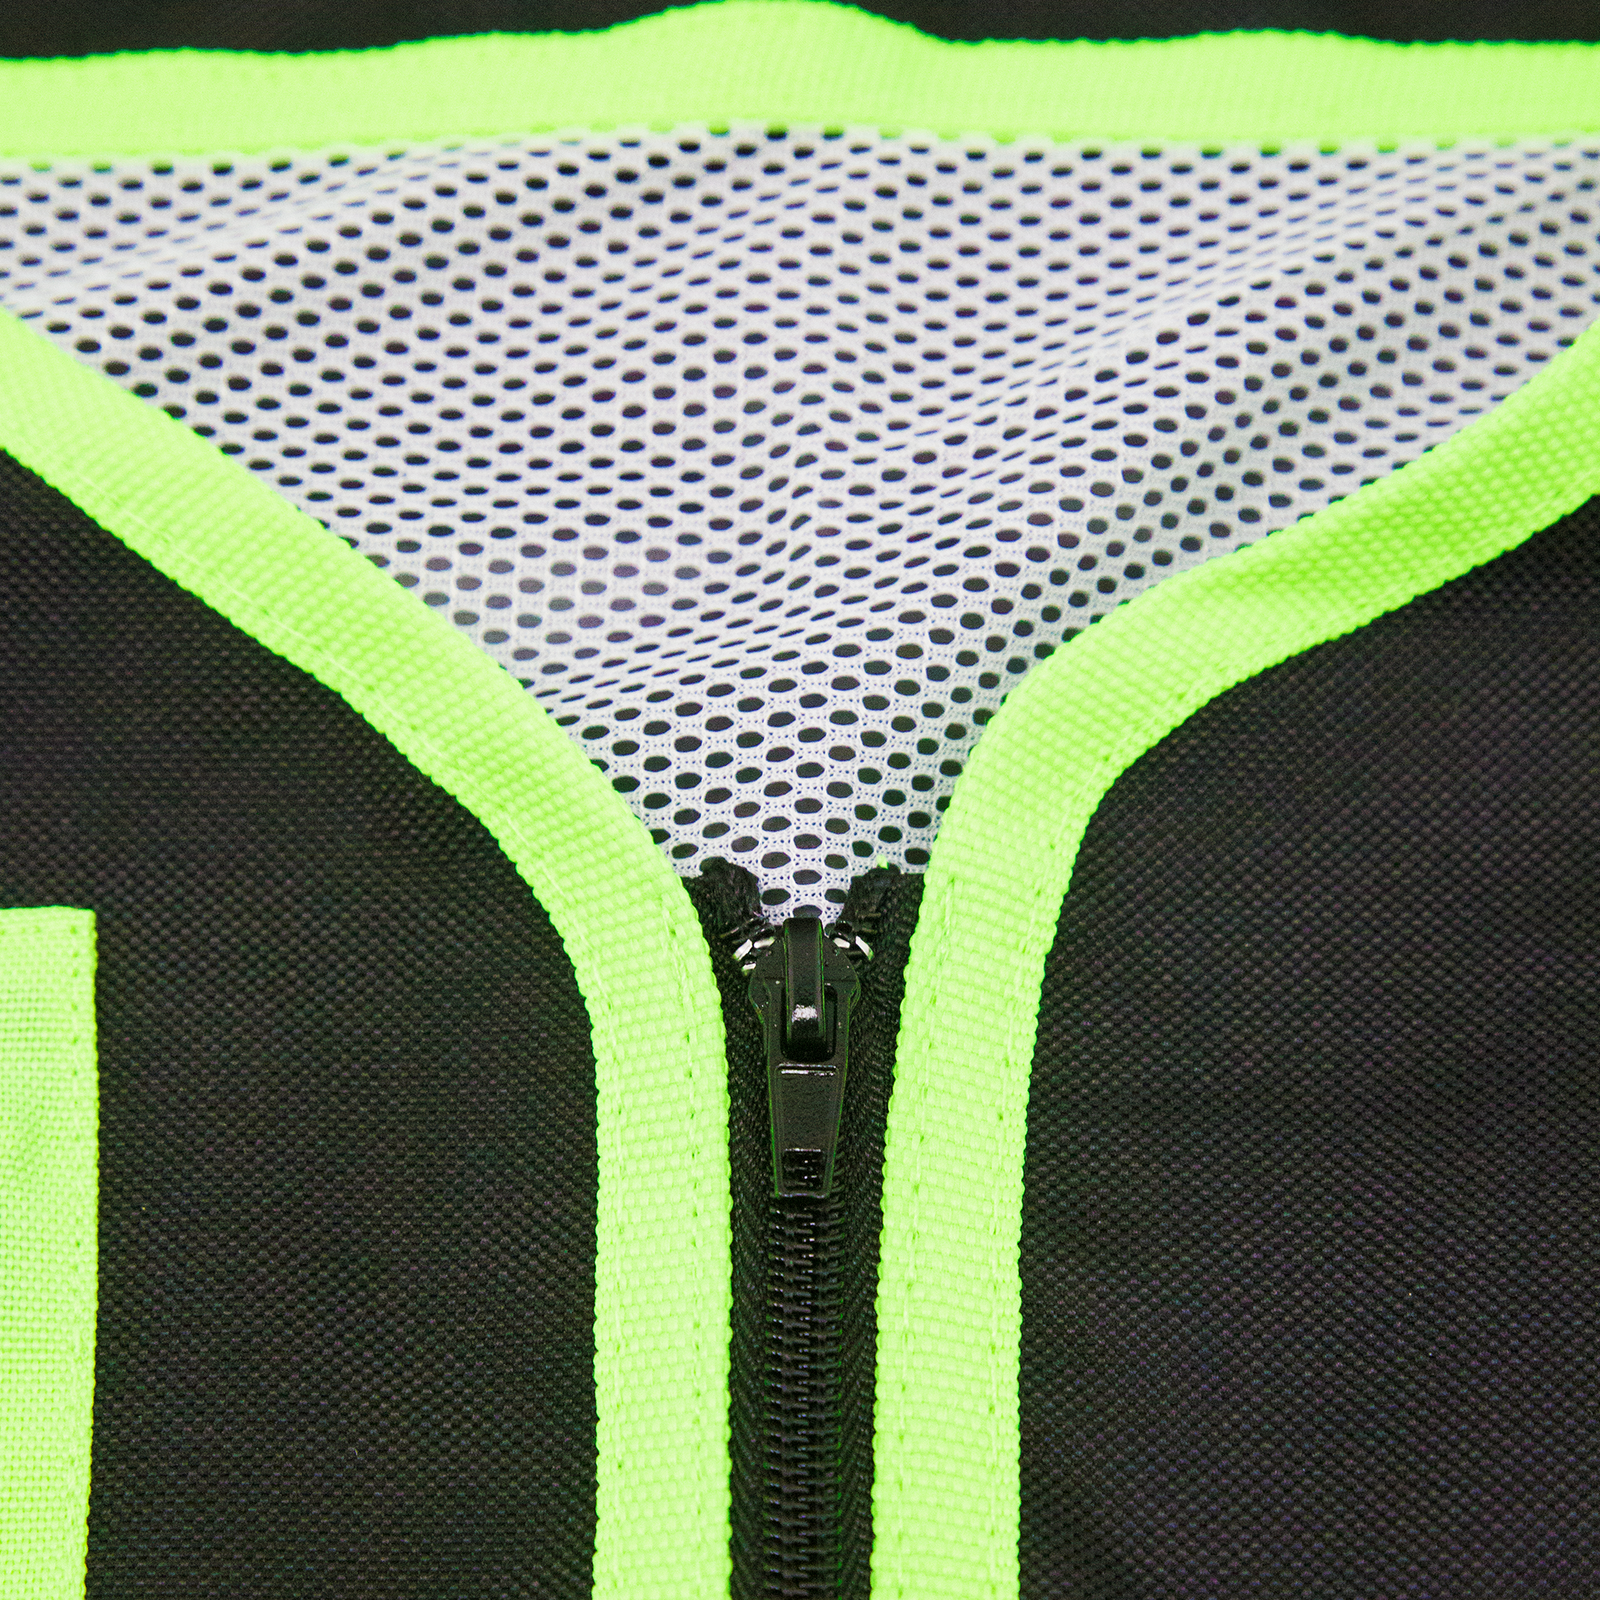 Close up shows the zipper and the mesh liner of the tool vest